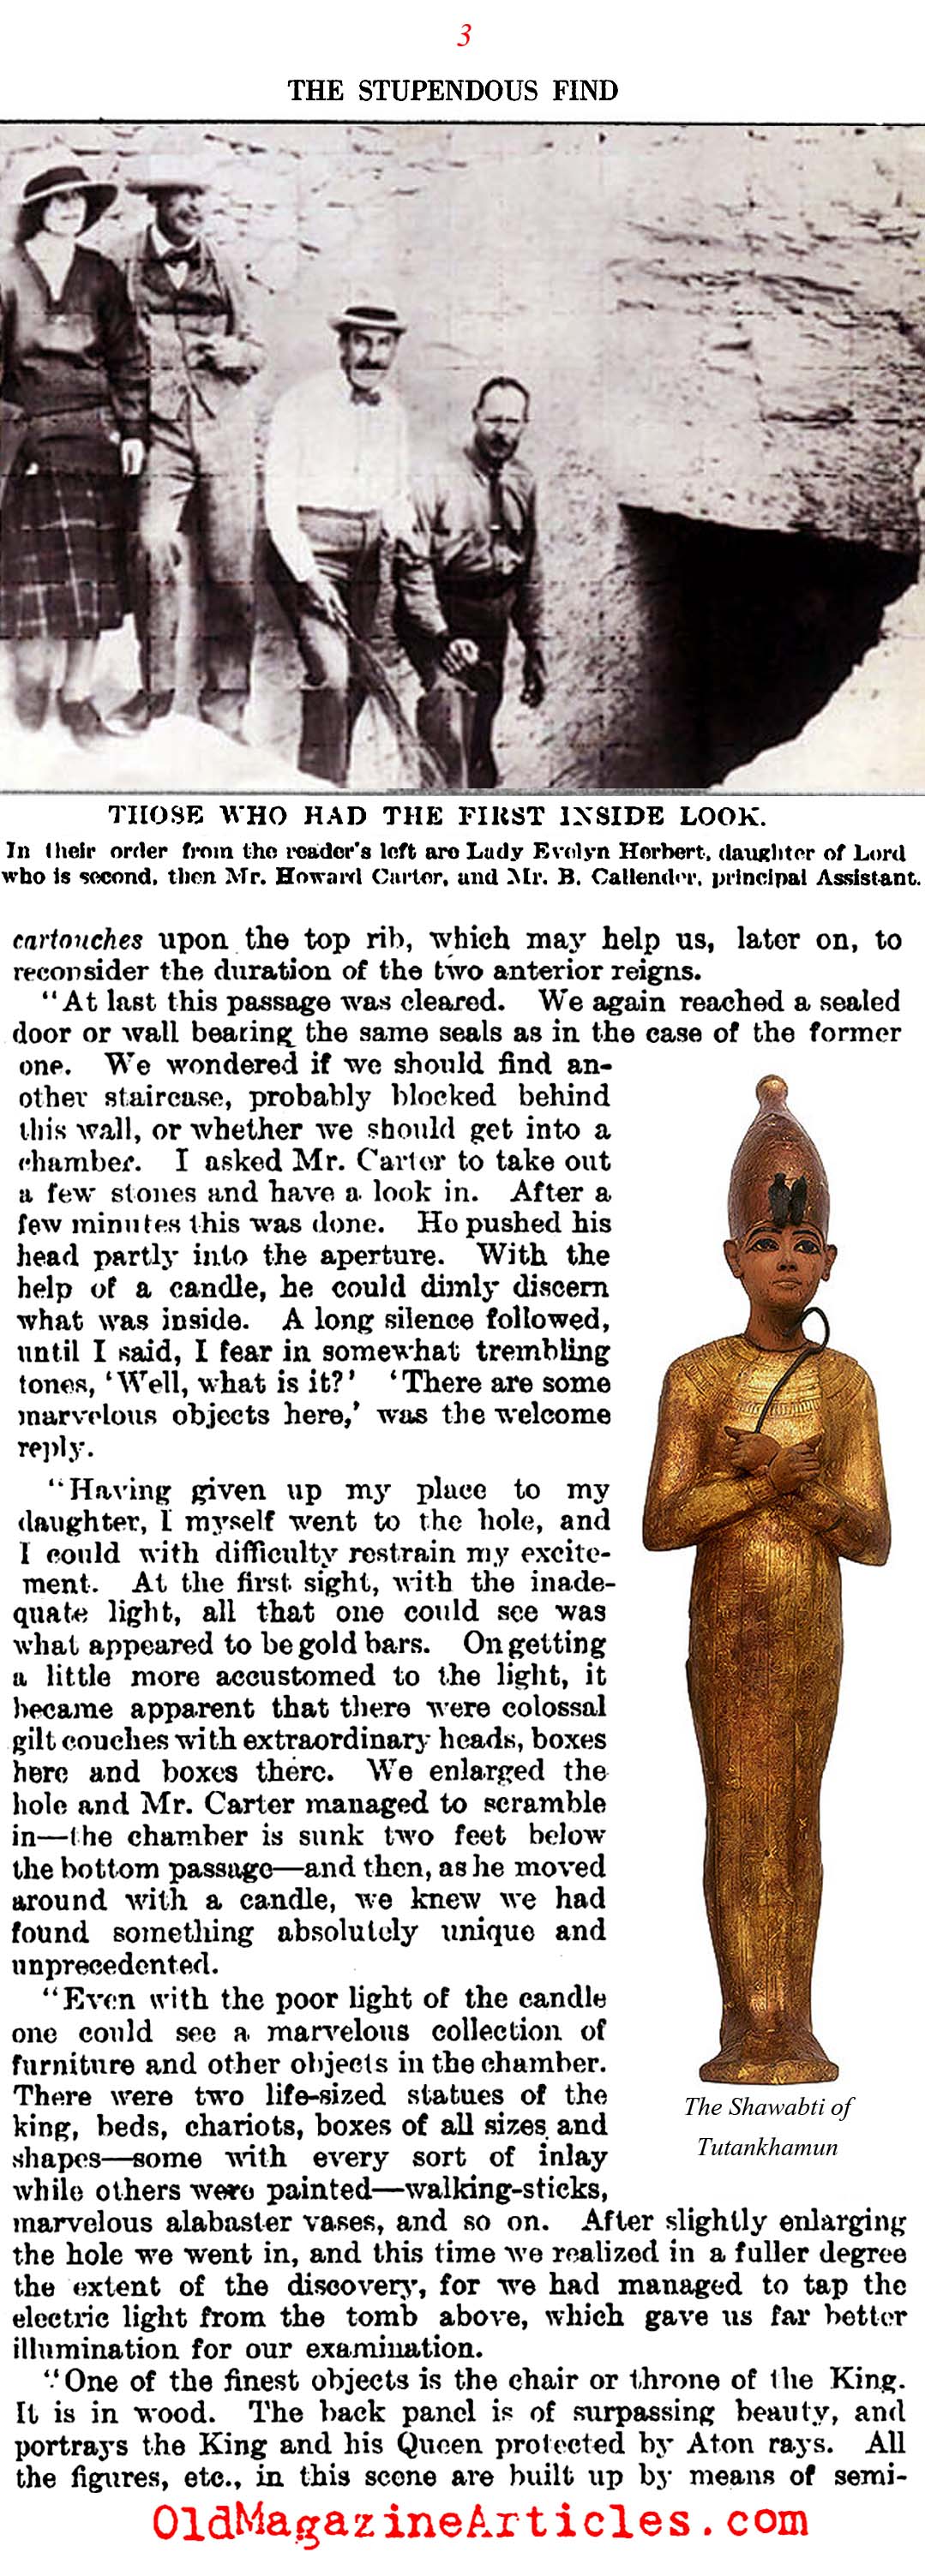 King Tut Tomb Discoveryold Newspaper About Tutankhamens Tomb Discovery